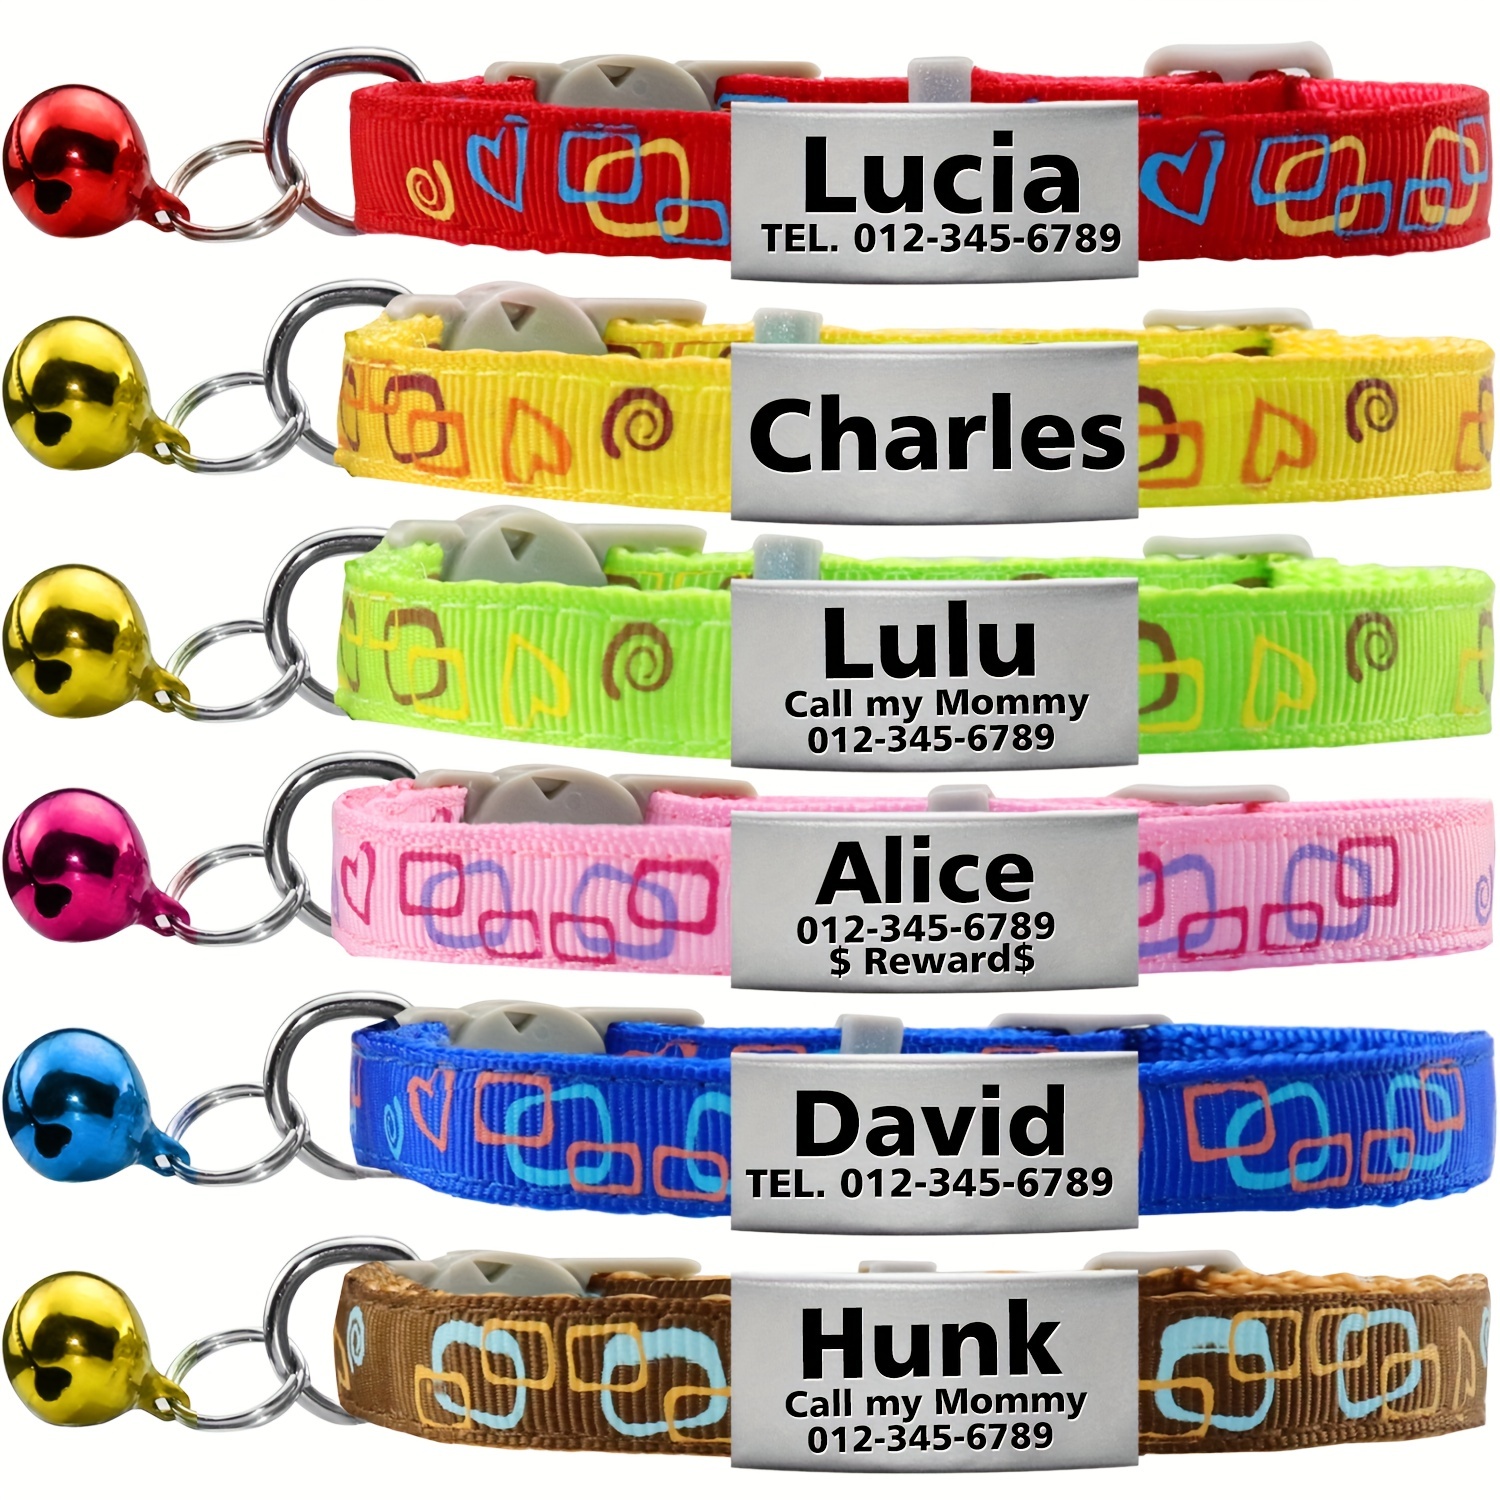 

Personalized Safety Collars For Cats & Small Dogs - Breakaway Nylon Geometric Square Pattern With Bell & Name Tag